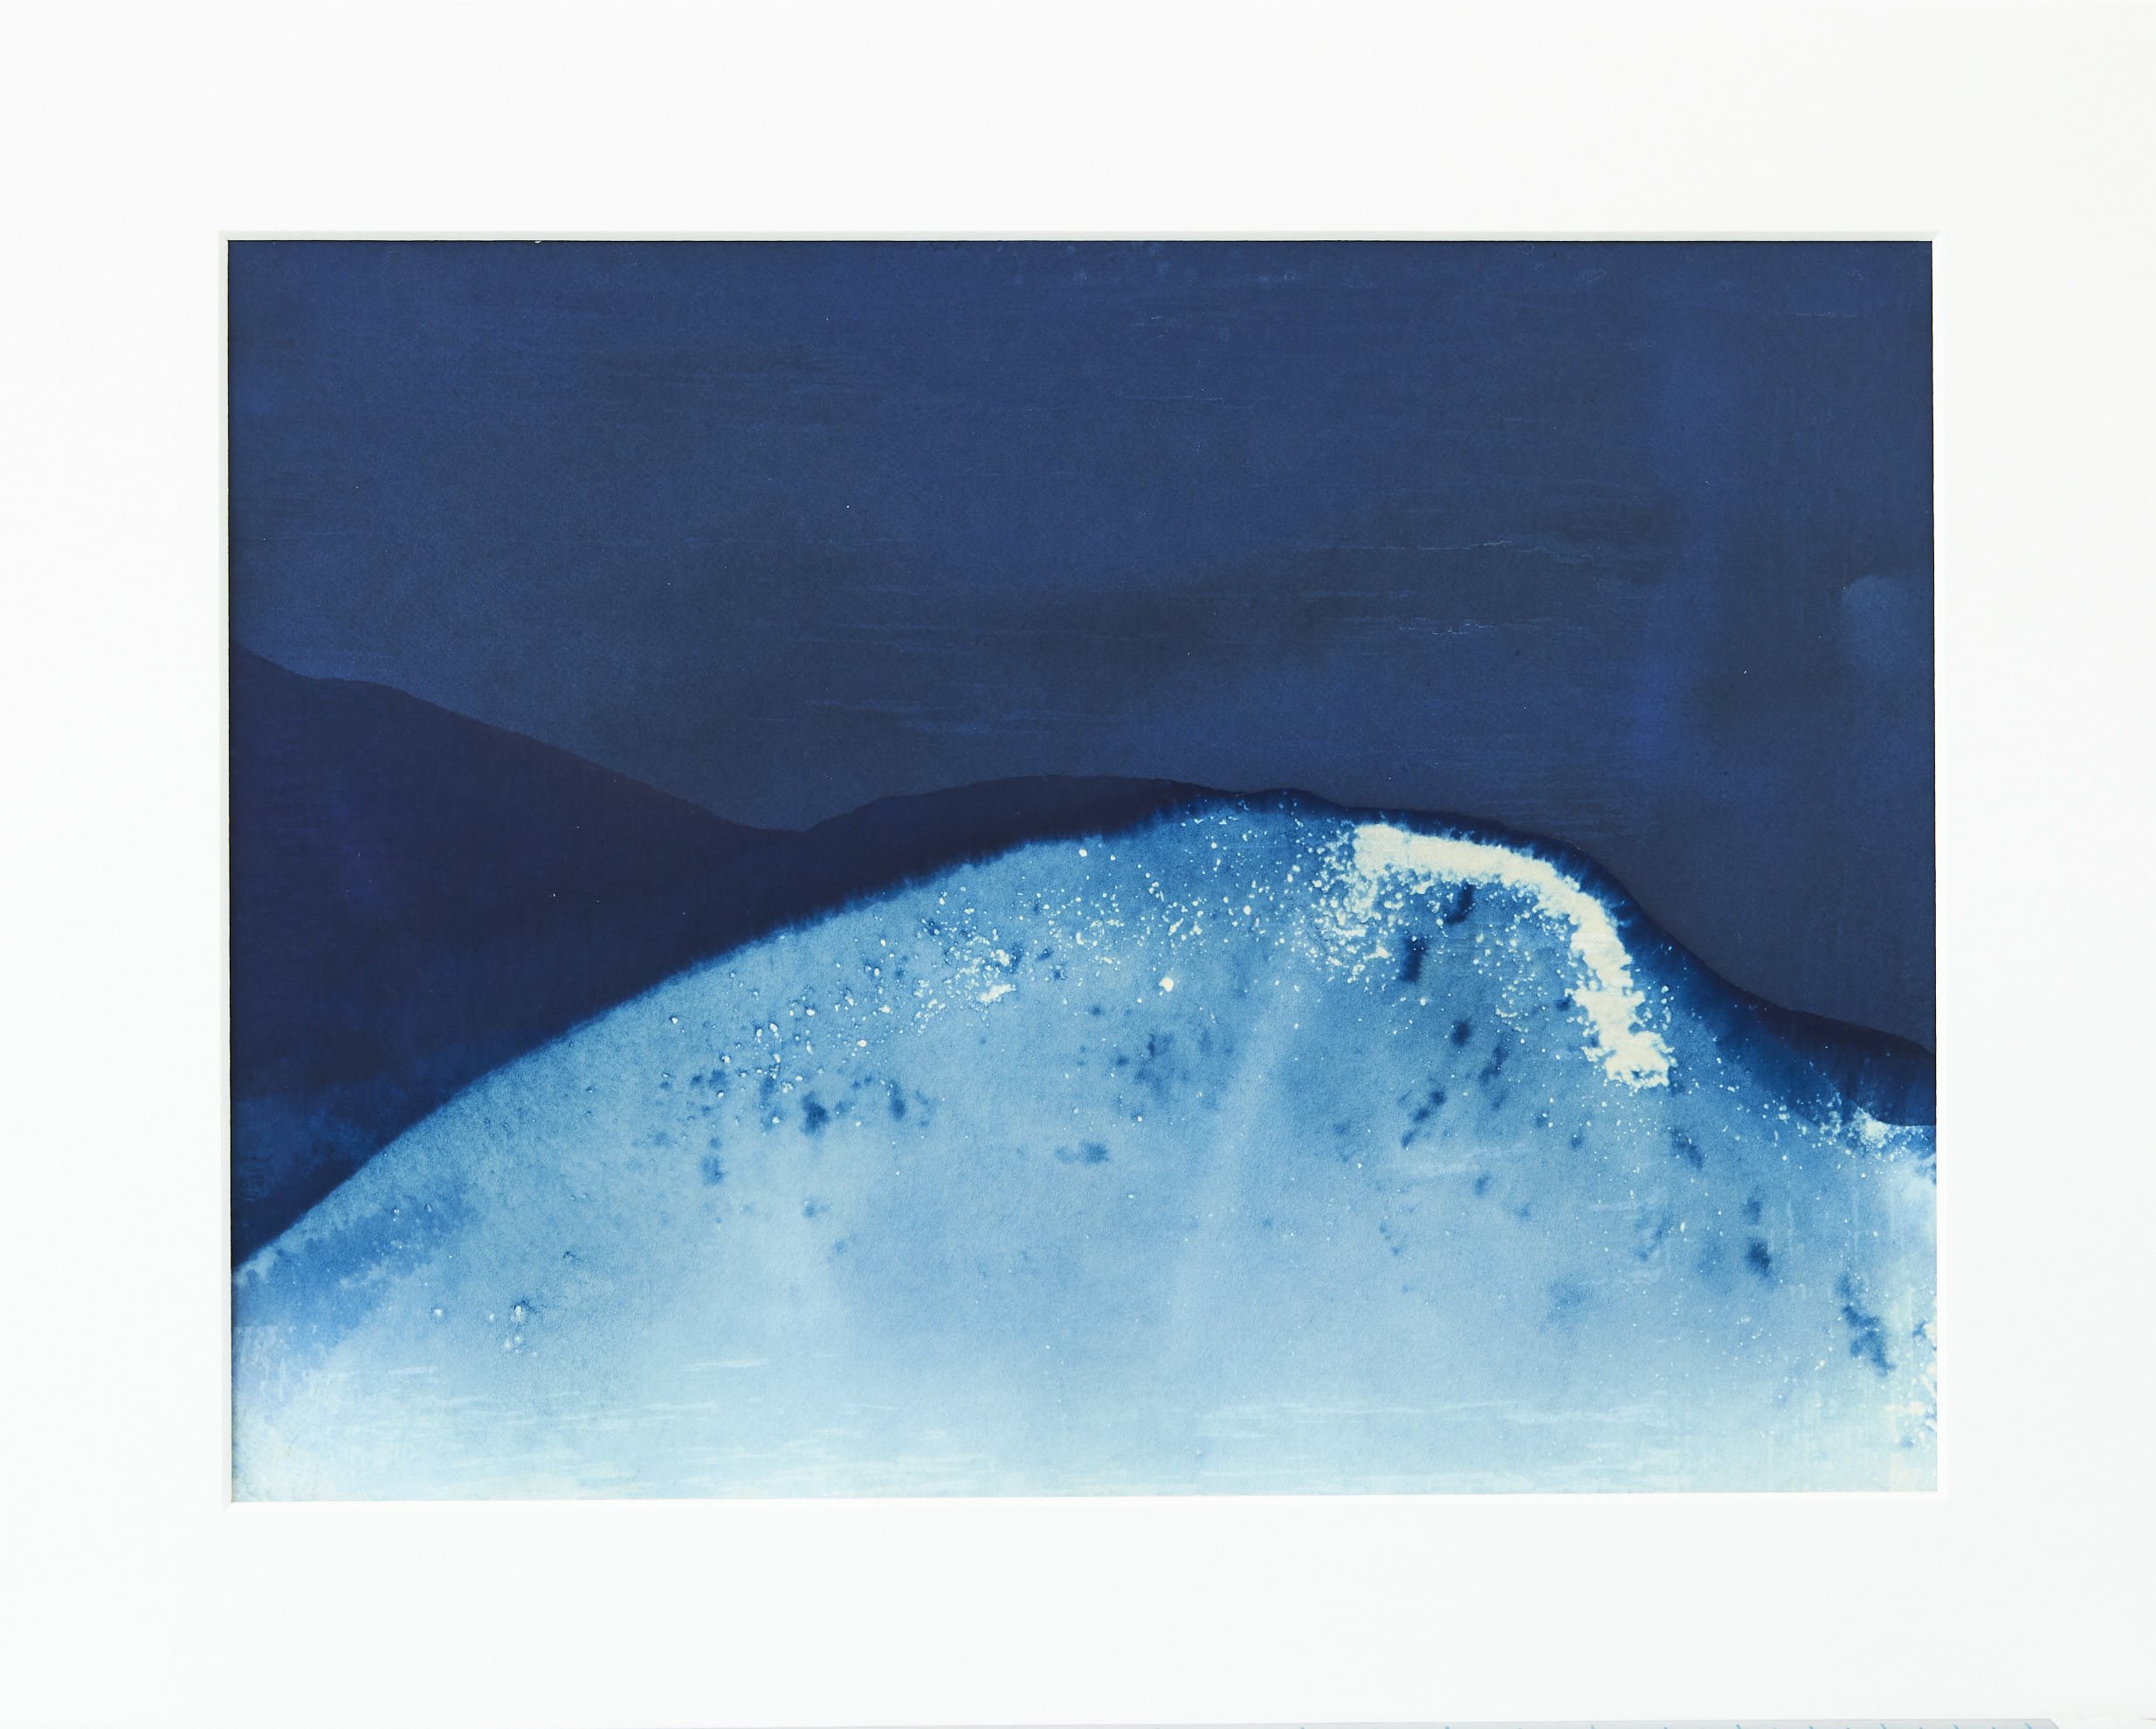  IL-Halford-2021-018 Cyanotype on paper  Print 9x12in  